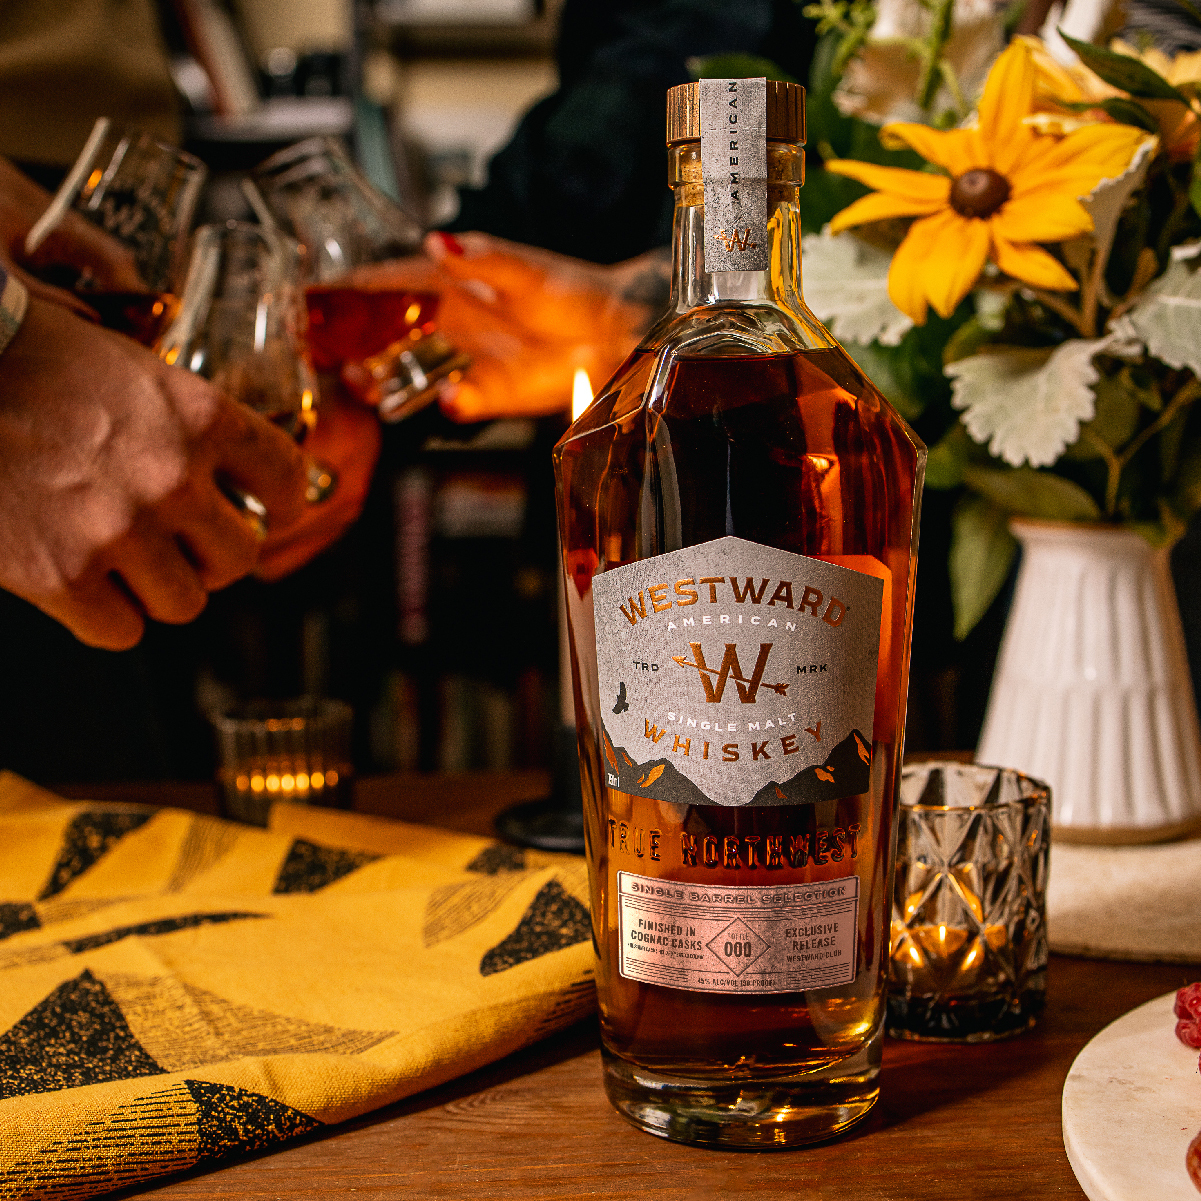 Westward Unveils New Cognac Cask Finish for Whiskey Club Members